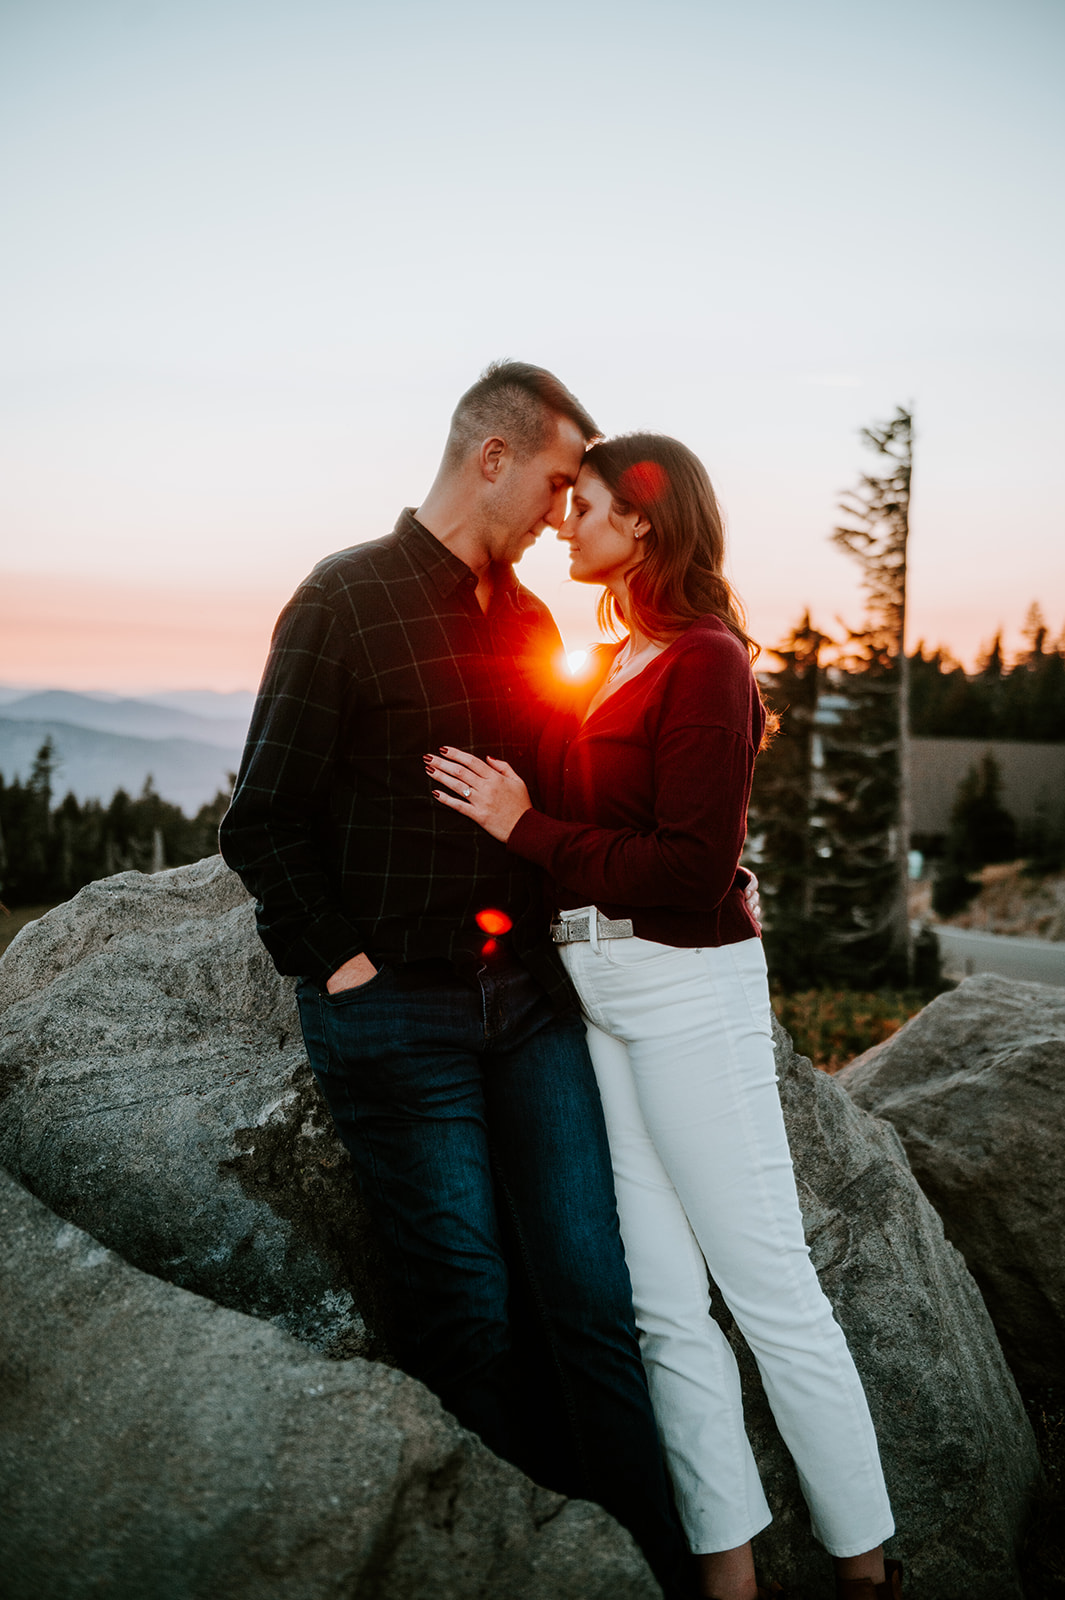 Couple embracing on Mt. Hood at sunset